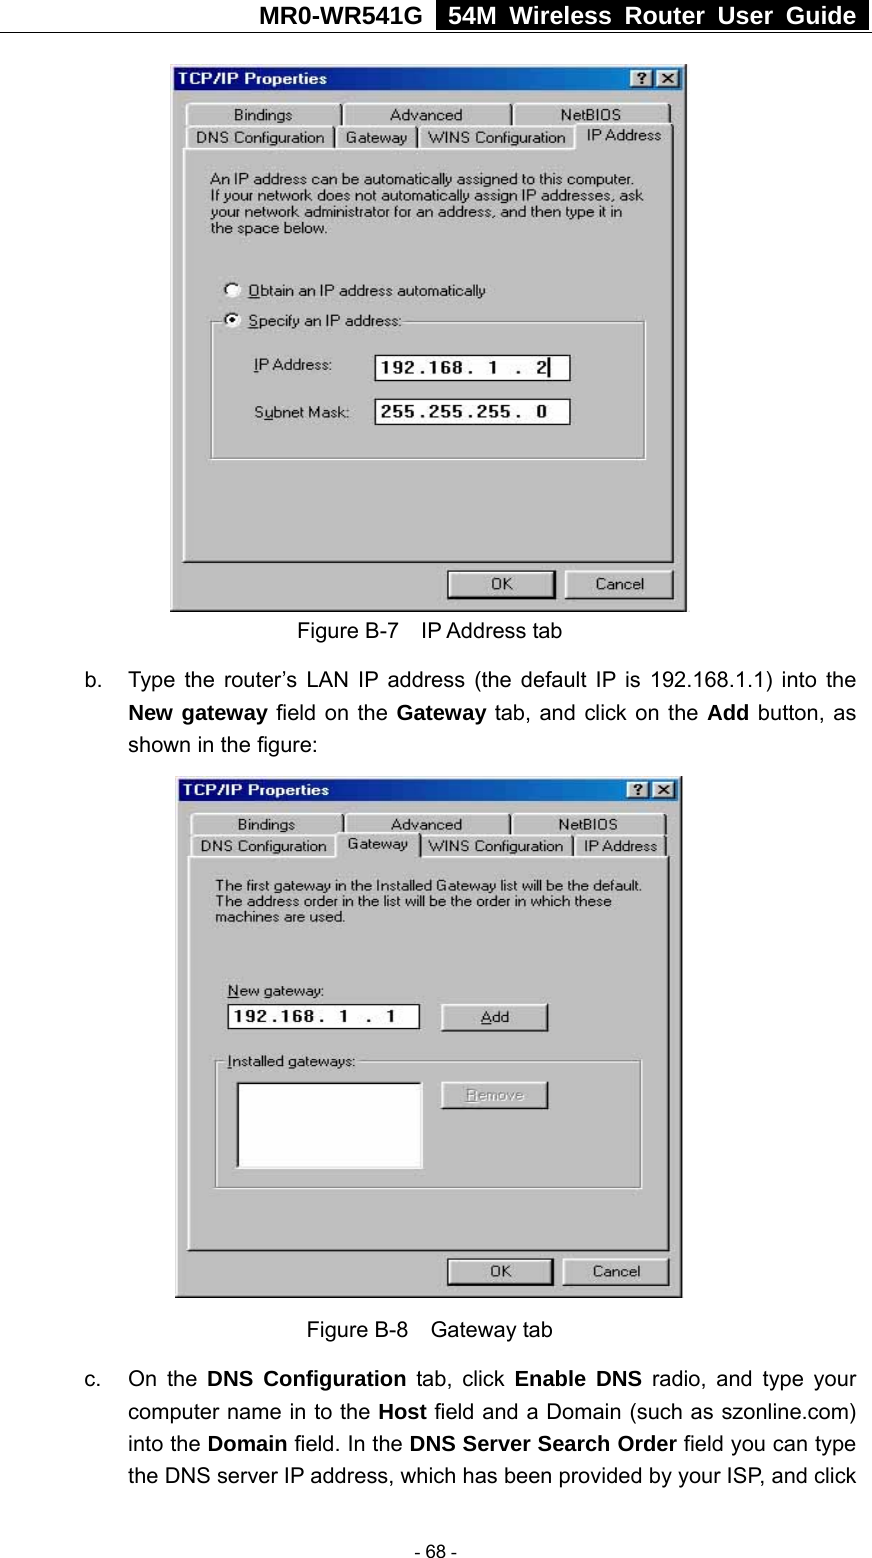 MR0-WR541G   54M Wireless Router User Guide   Figure B-7  IP Address tab b.  Type the router’s LAN IP address (the default IP is 192.168.1.1) into the New gateway field on the Gateway tab, and click on the Add button, as shown in the figure:    Figure B-8  Gateway tab c. On the DNS Configuration tab, click Enable DNS radio, and type your computer name in to the Host field and a Domain (such as szonline.com) into the Domain field. In the DNS Server Search Order field you can type the DNS server IP address, which has been provided by your ISP, and click  - 68 - 